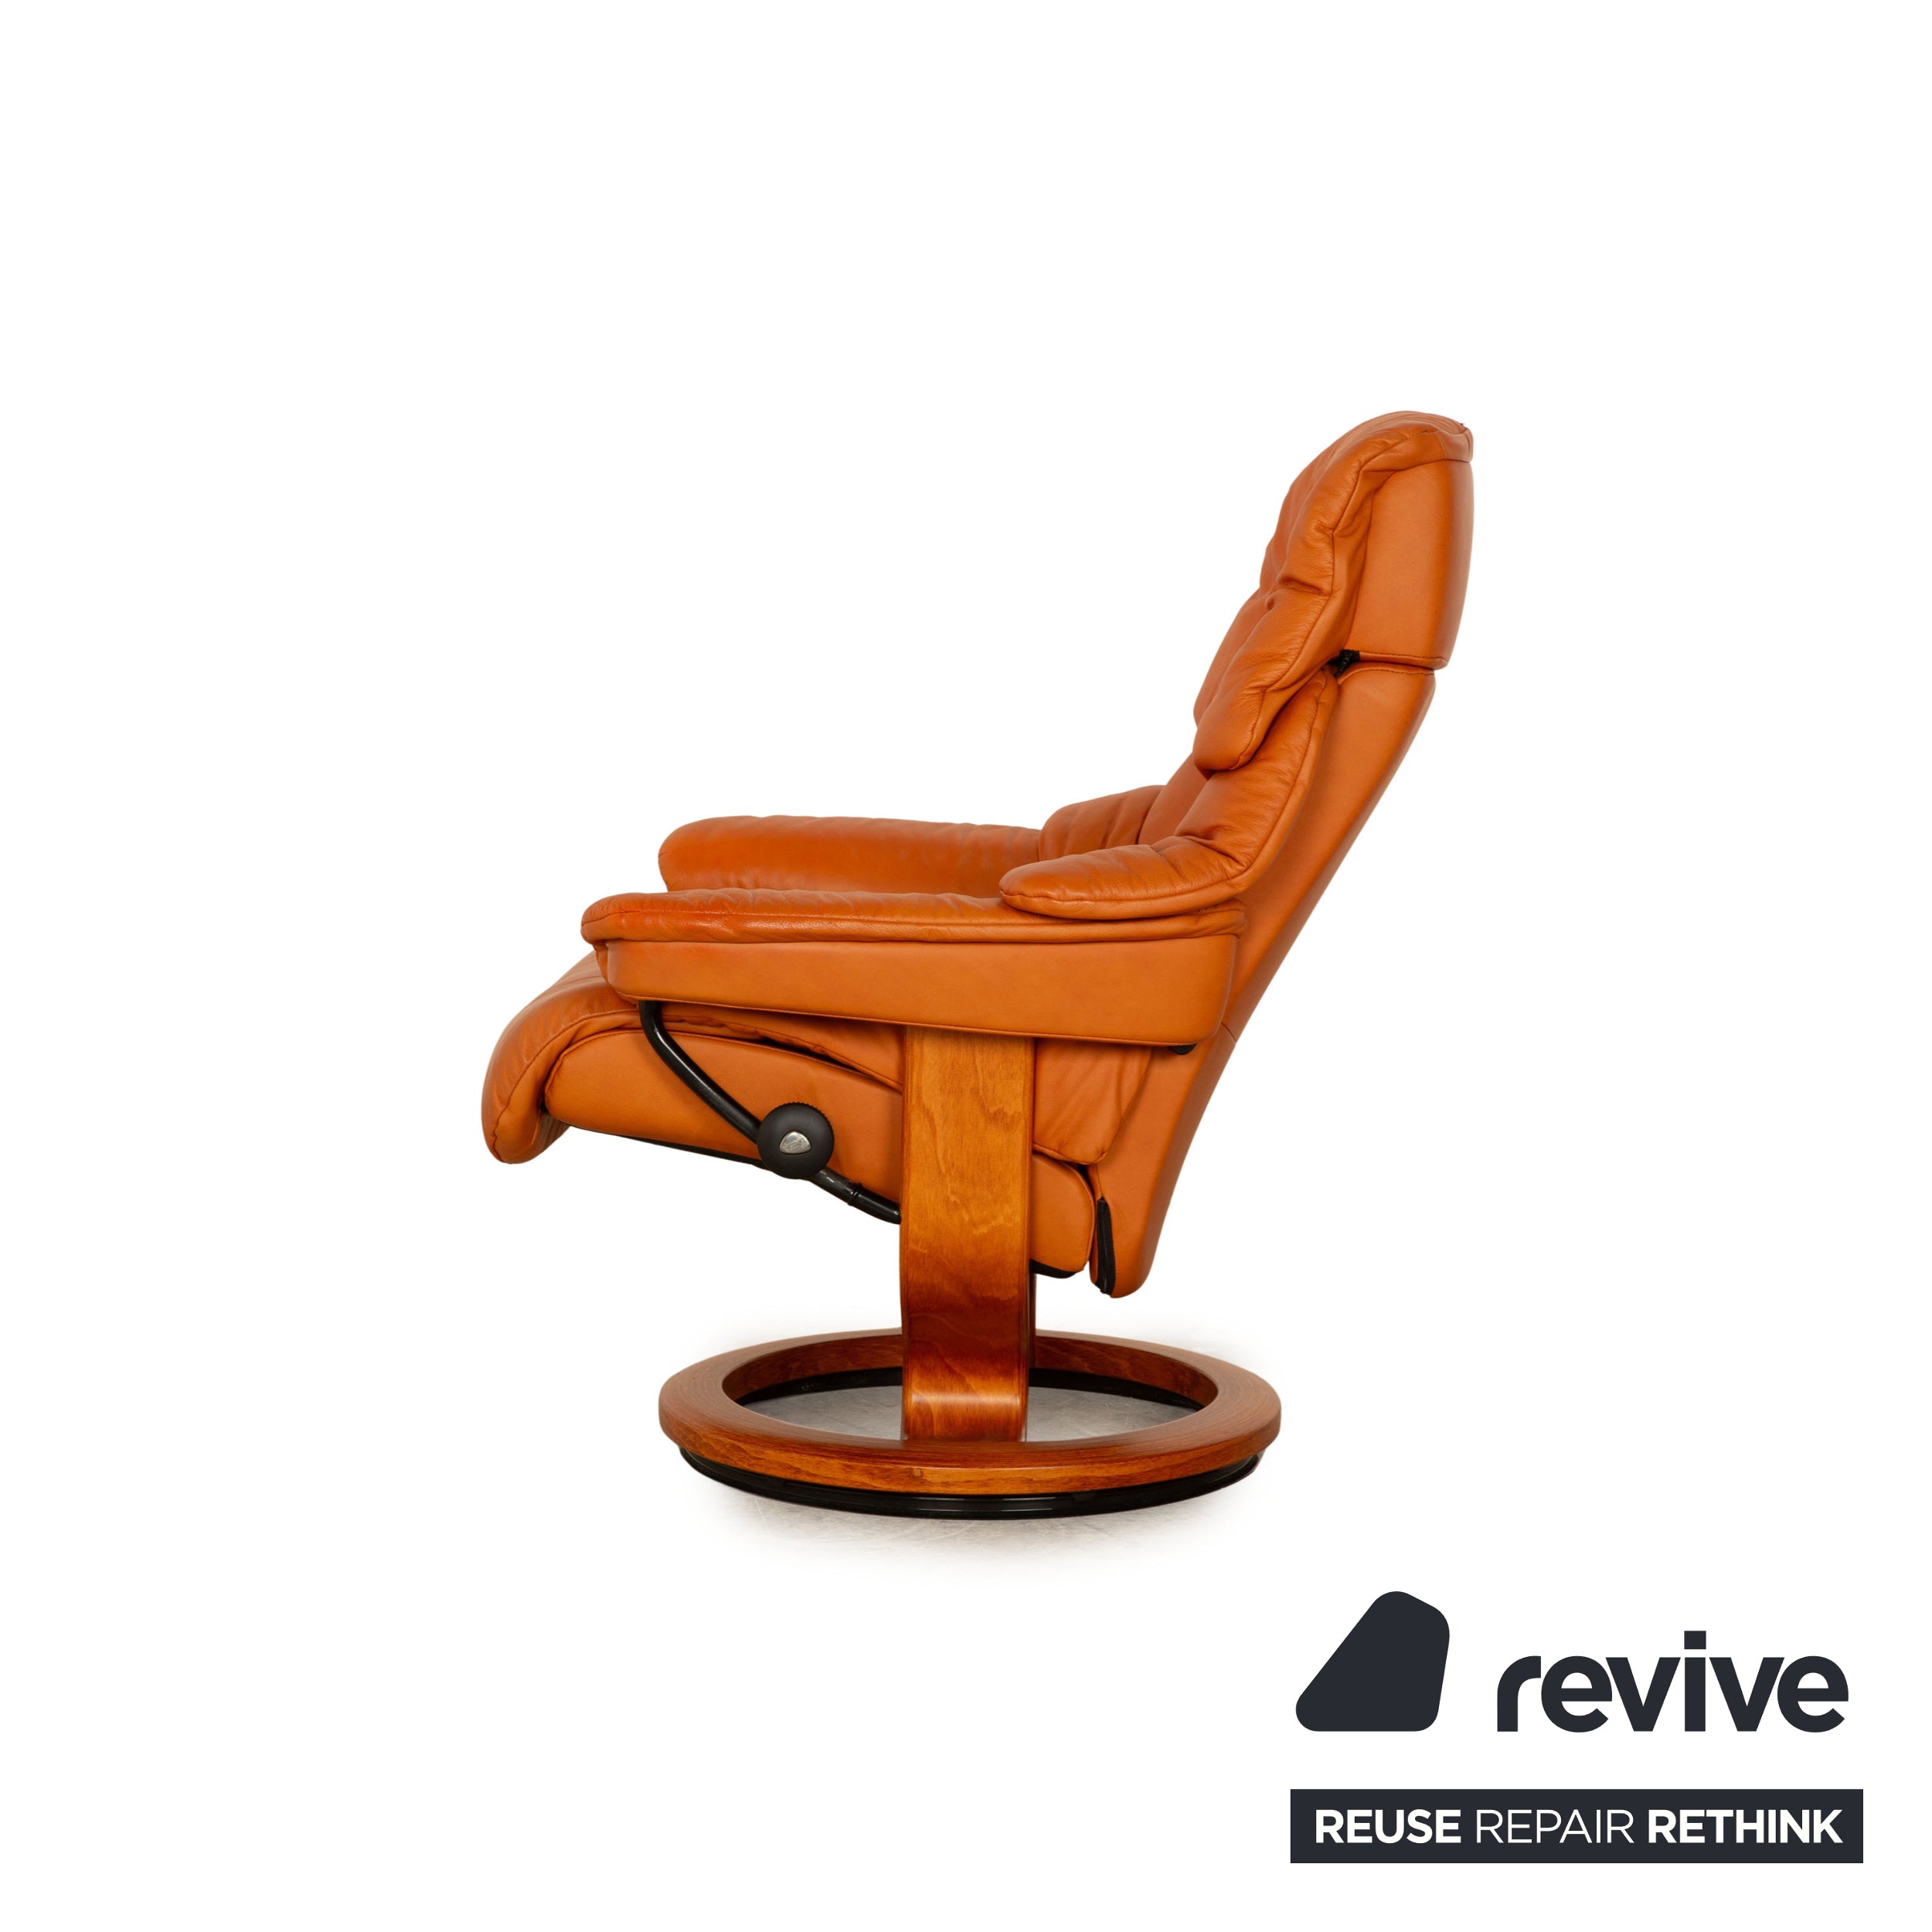 Stressless Reno leather armchair brown orange size M incl. stool manual function relaxation function